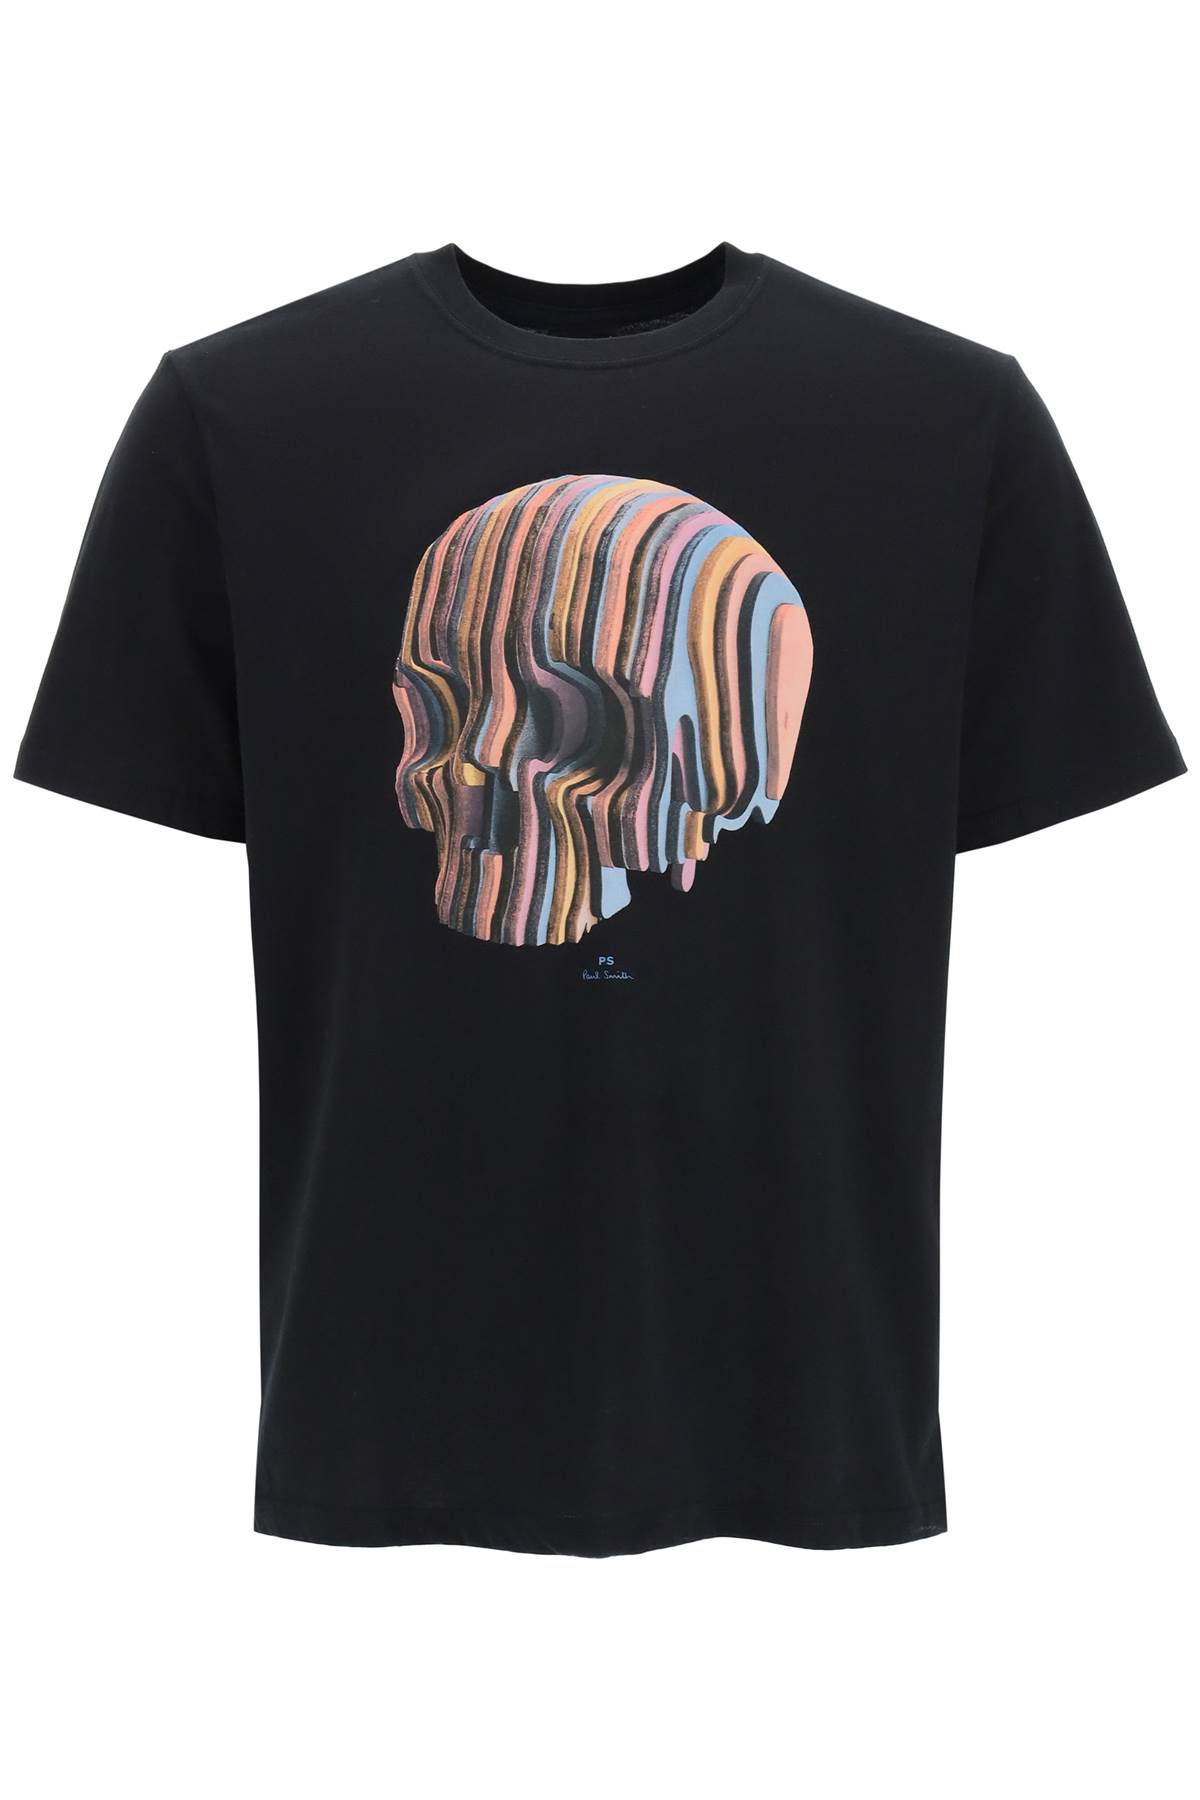 PS by Paul Smith wooden Stripe Skull Print T-shirt